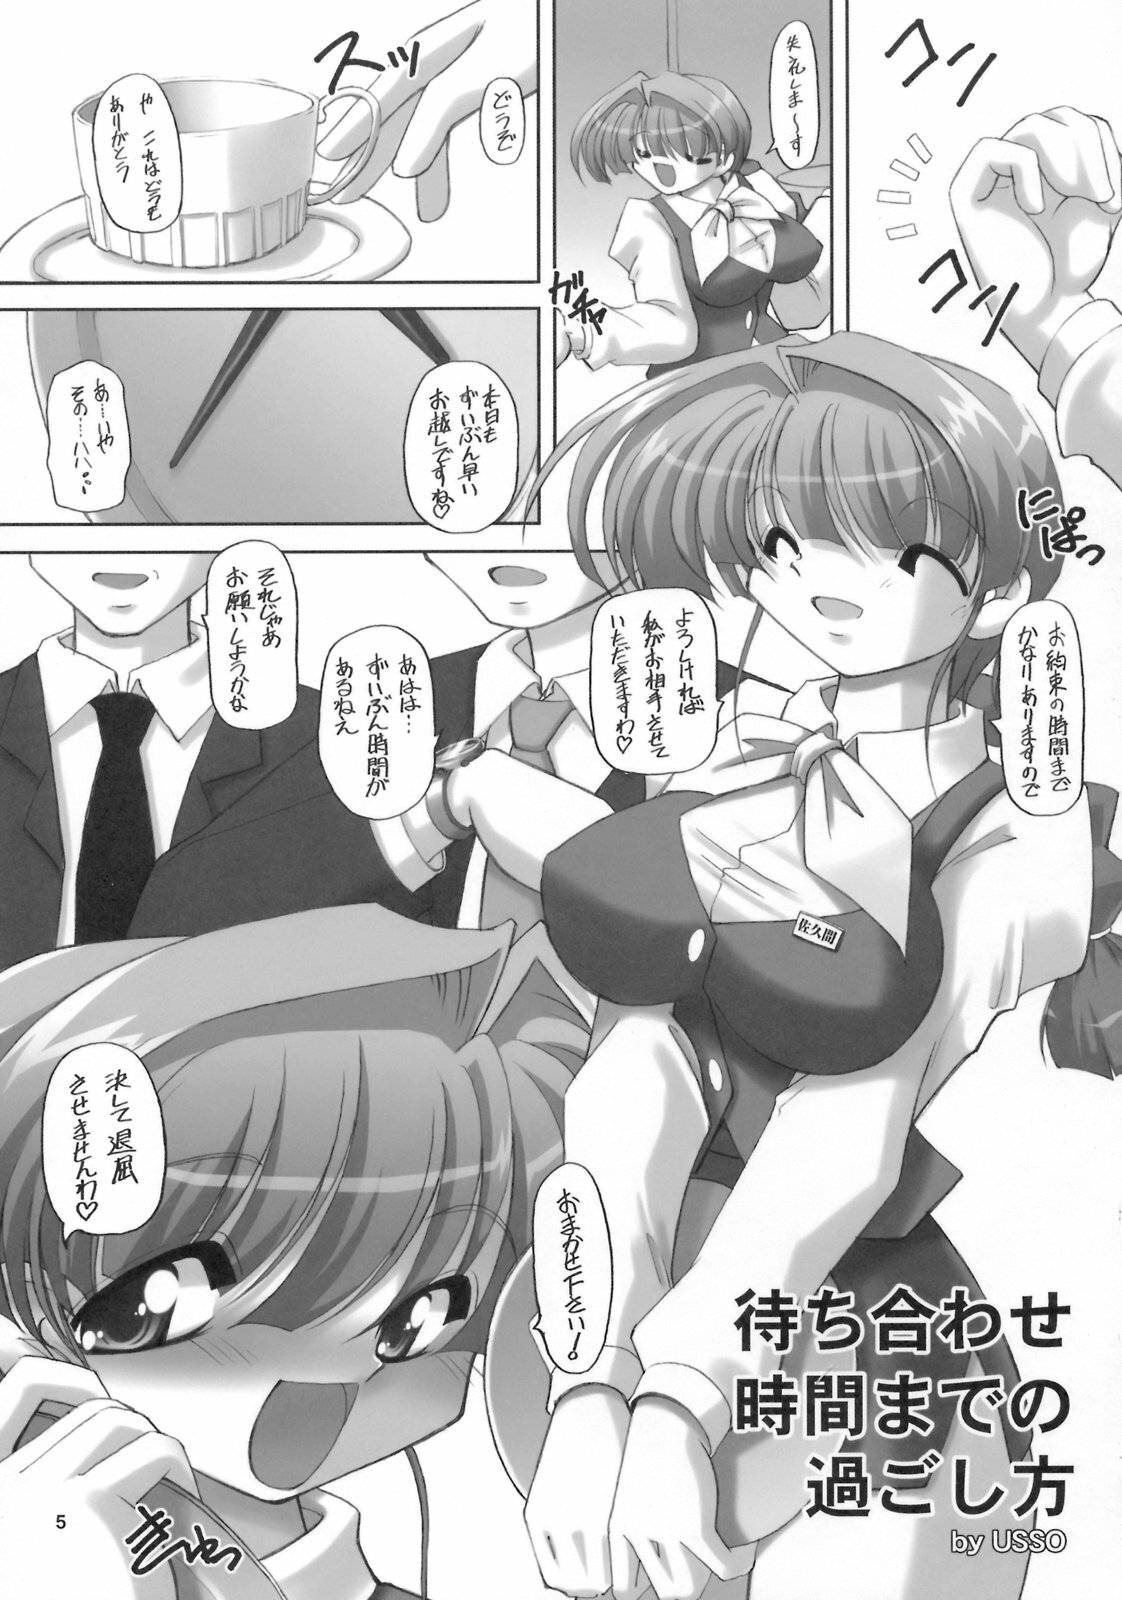 (C74) [KNOCKOUT (Various)] Ana Centimeter 3 (Various) page 4 full